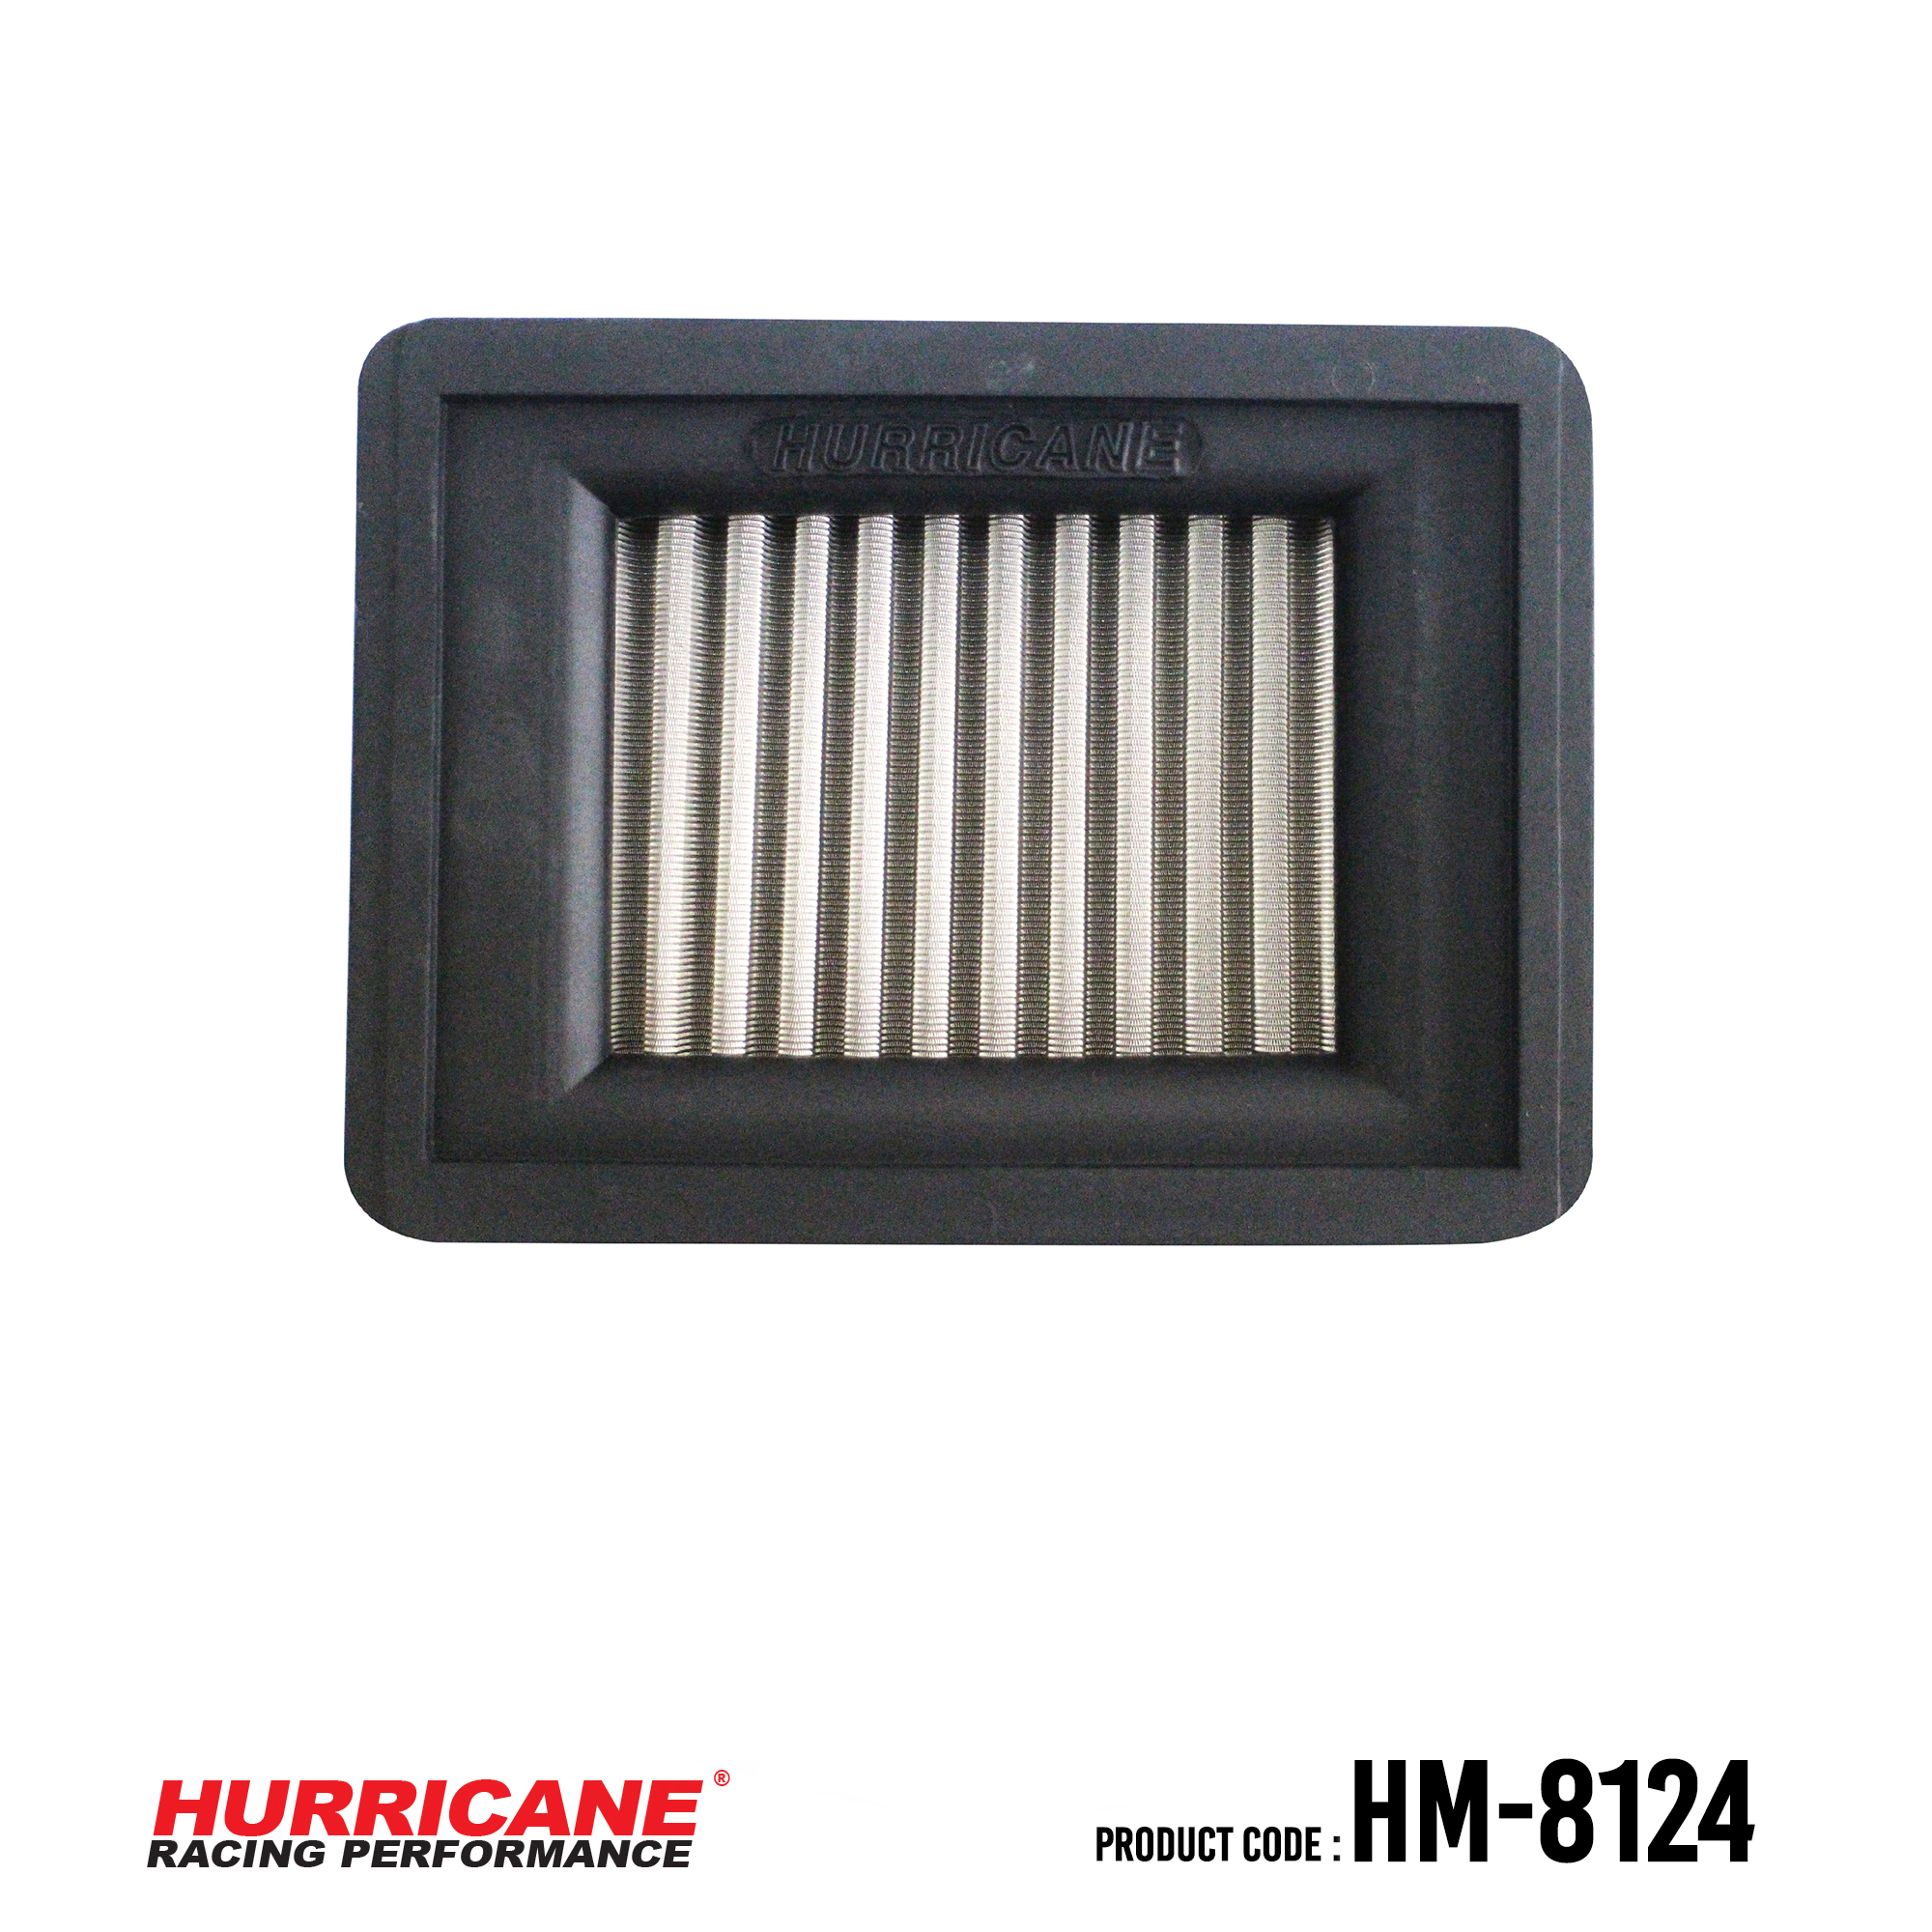 HURRICANE STAINLESS STEEL AIR FILTER FOR HM-8124 Yamaha